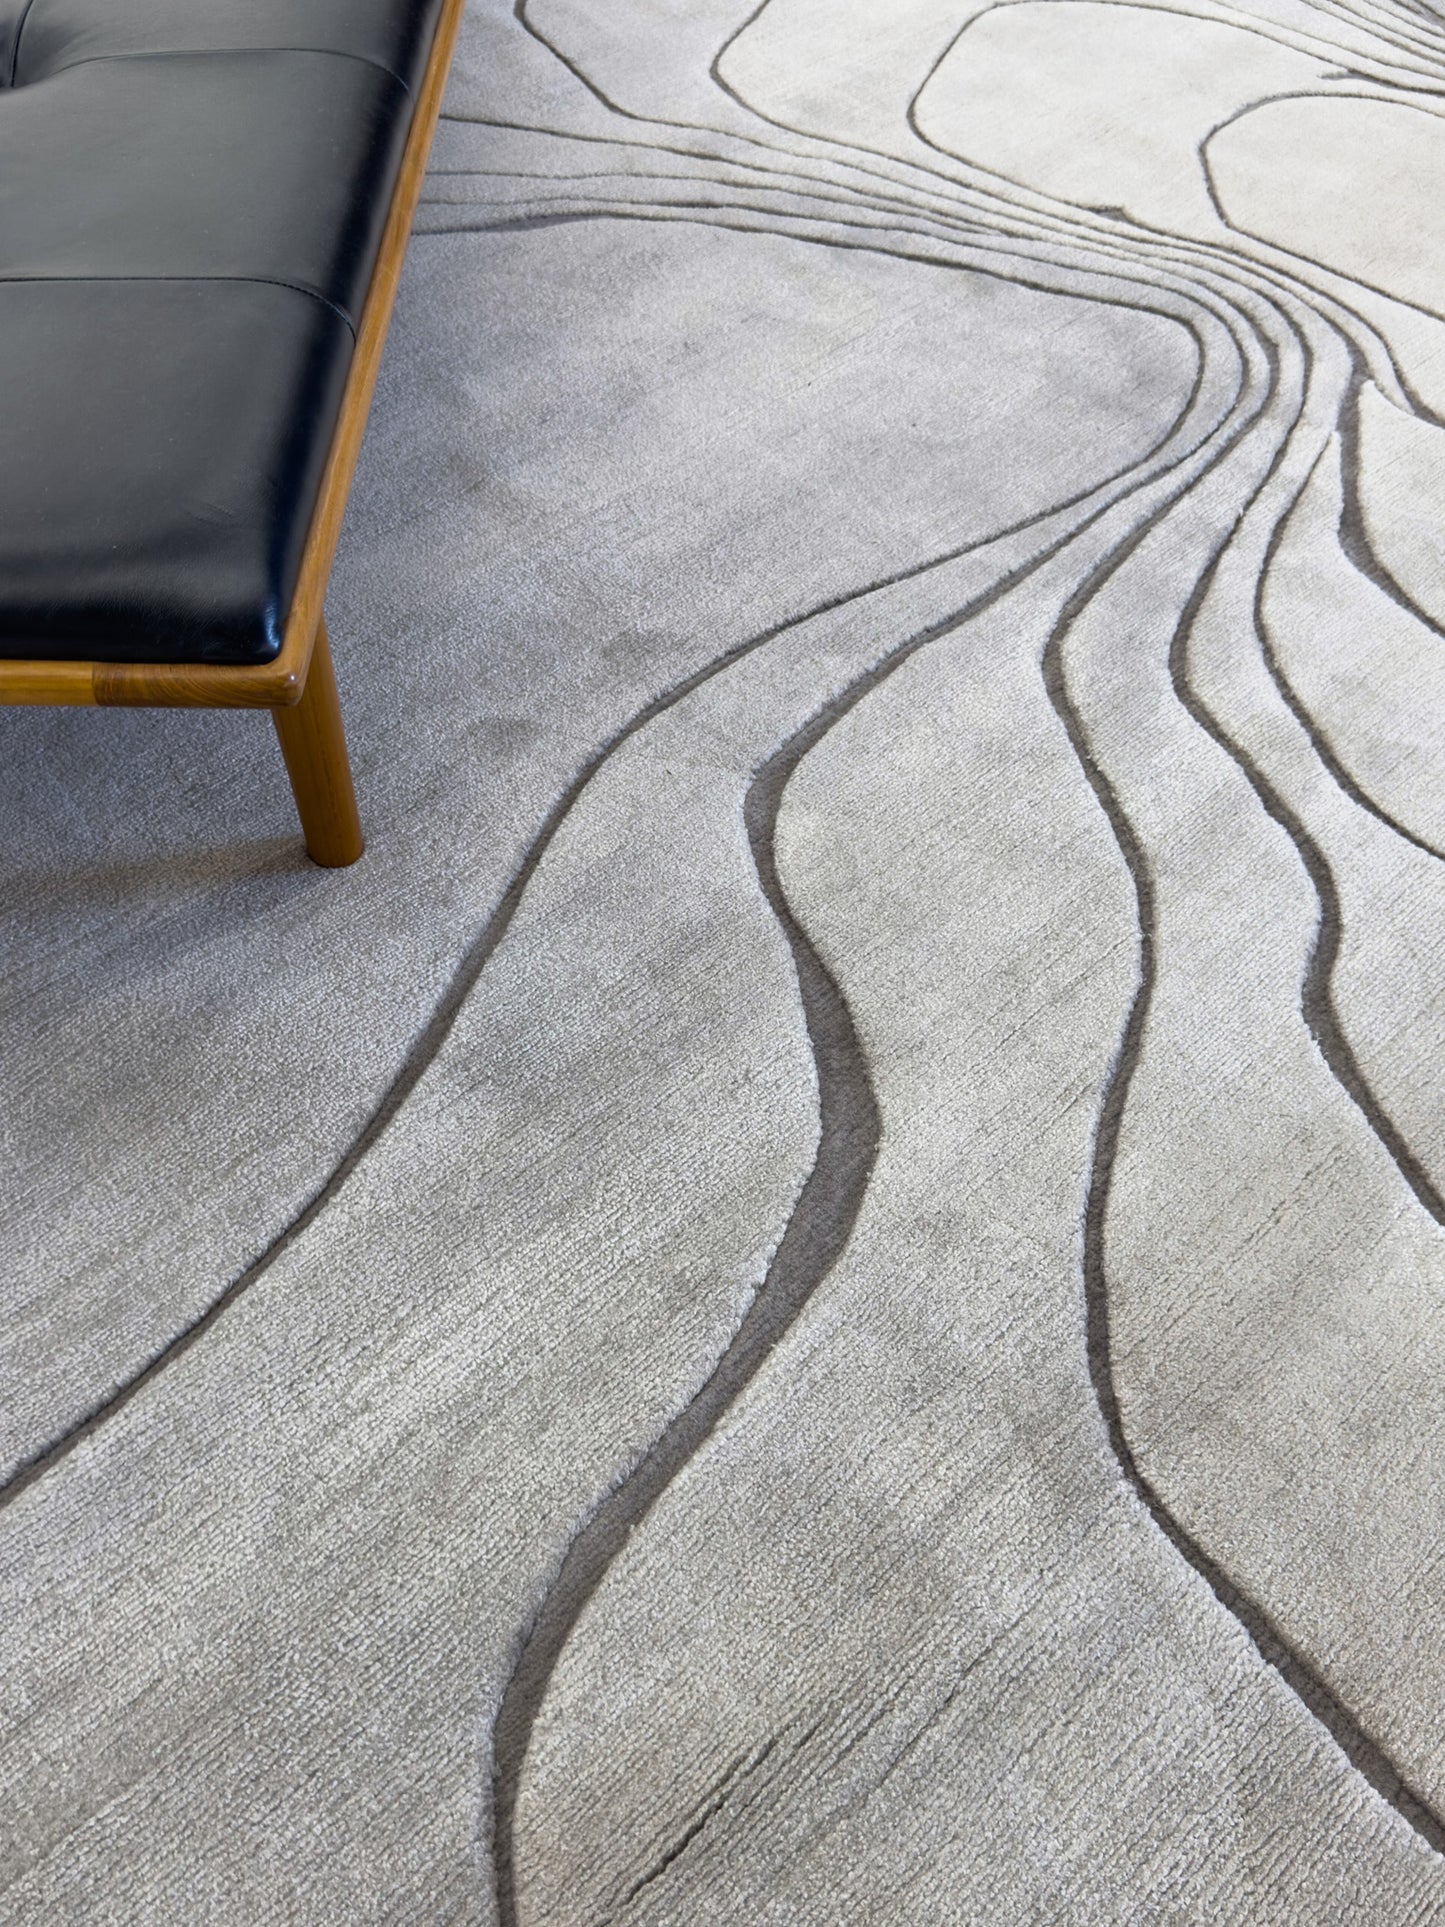 Modern Rug Image 2932 Echoes by Claudia Afshar